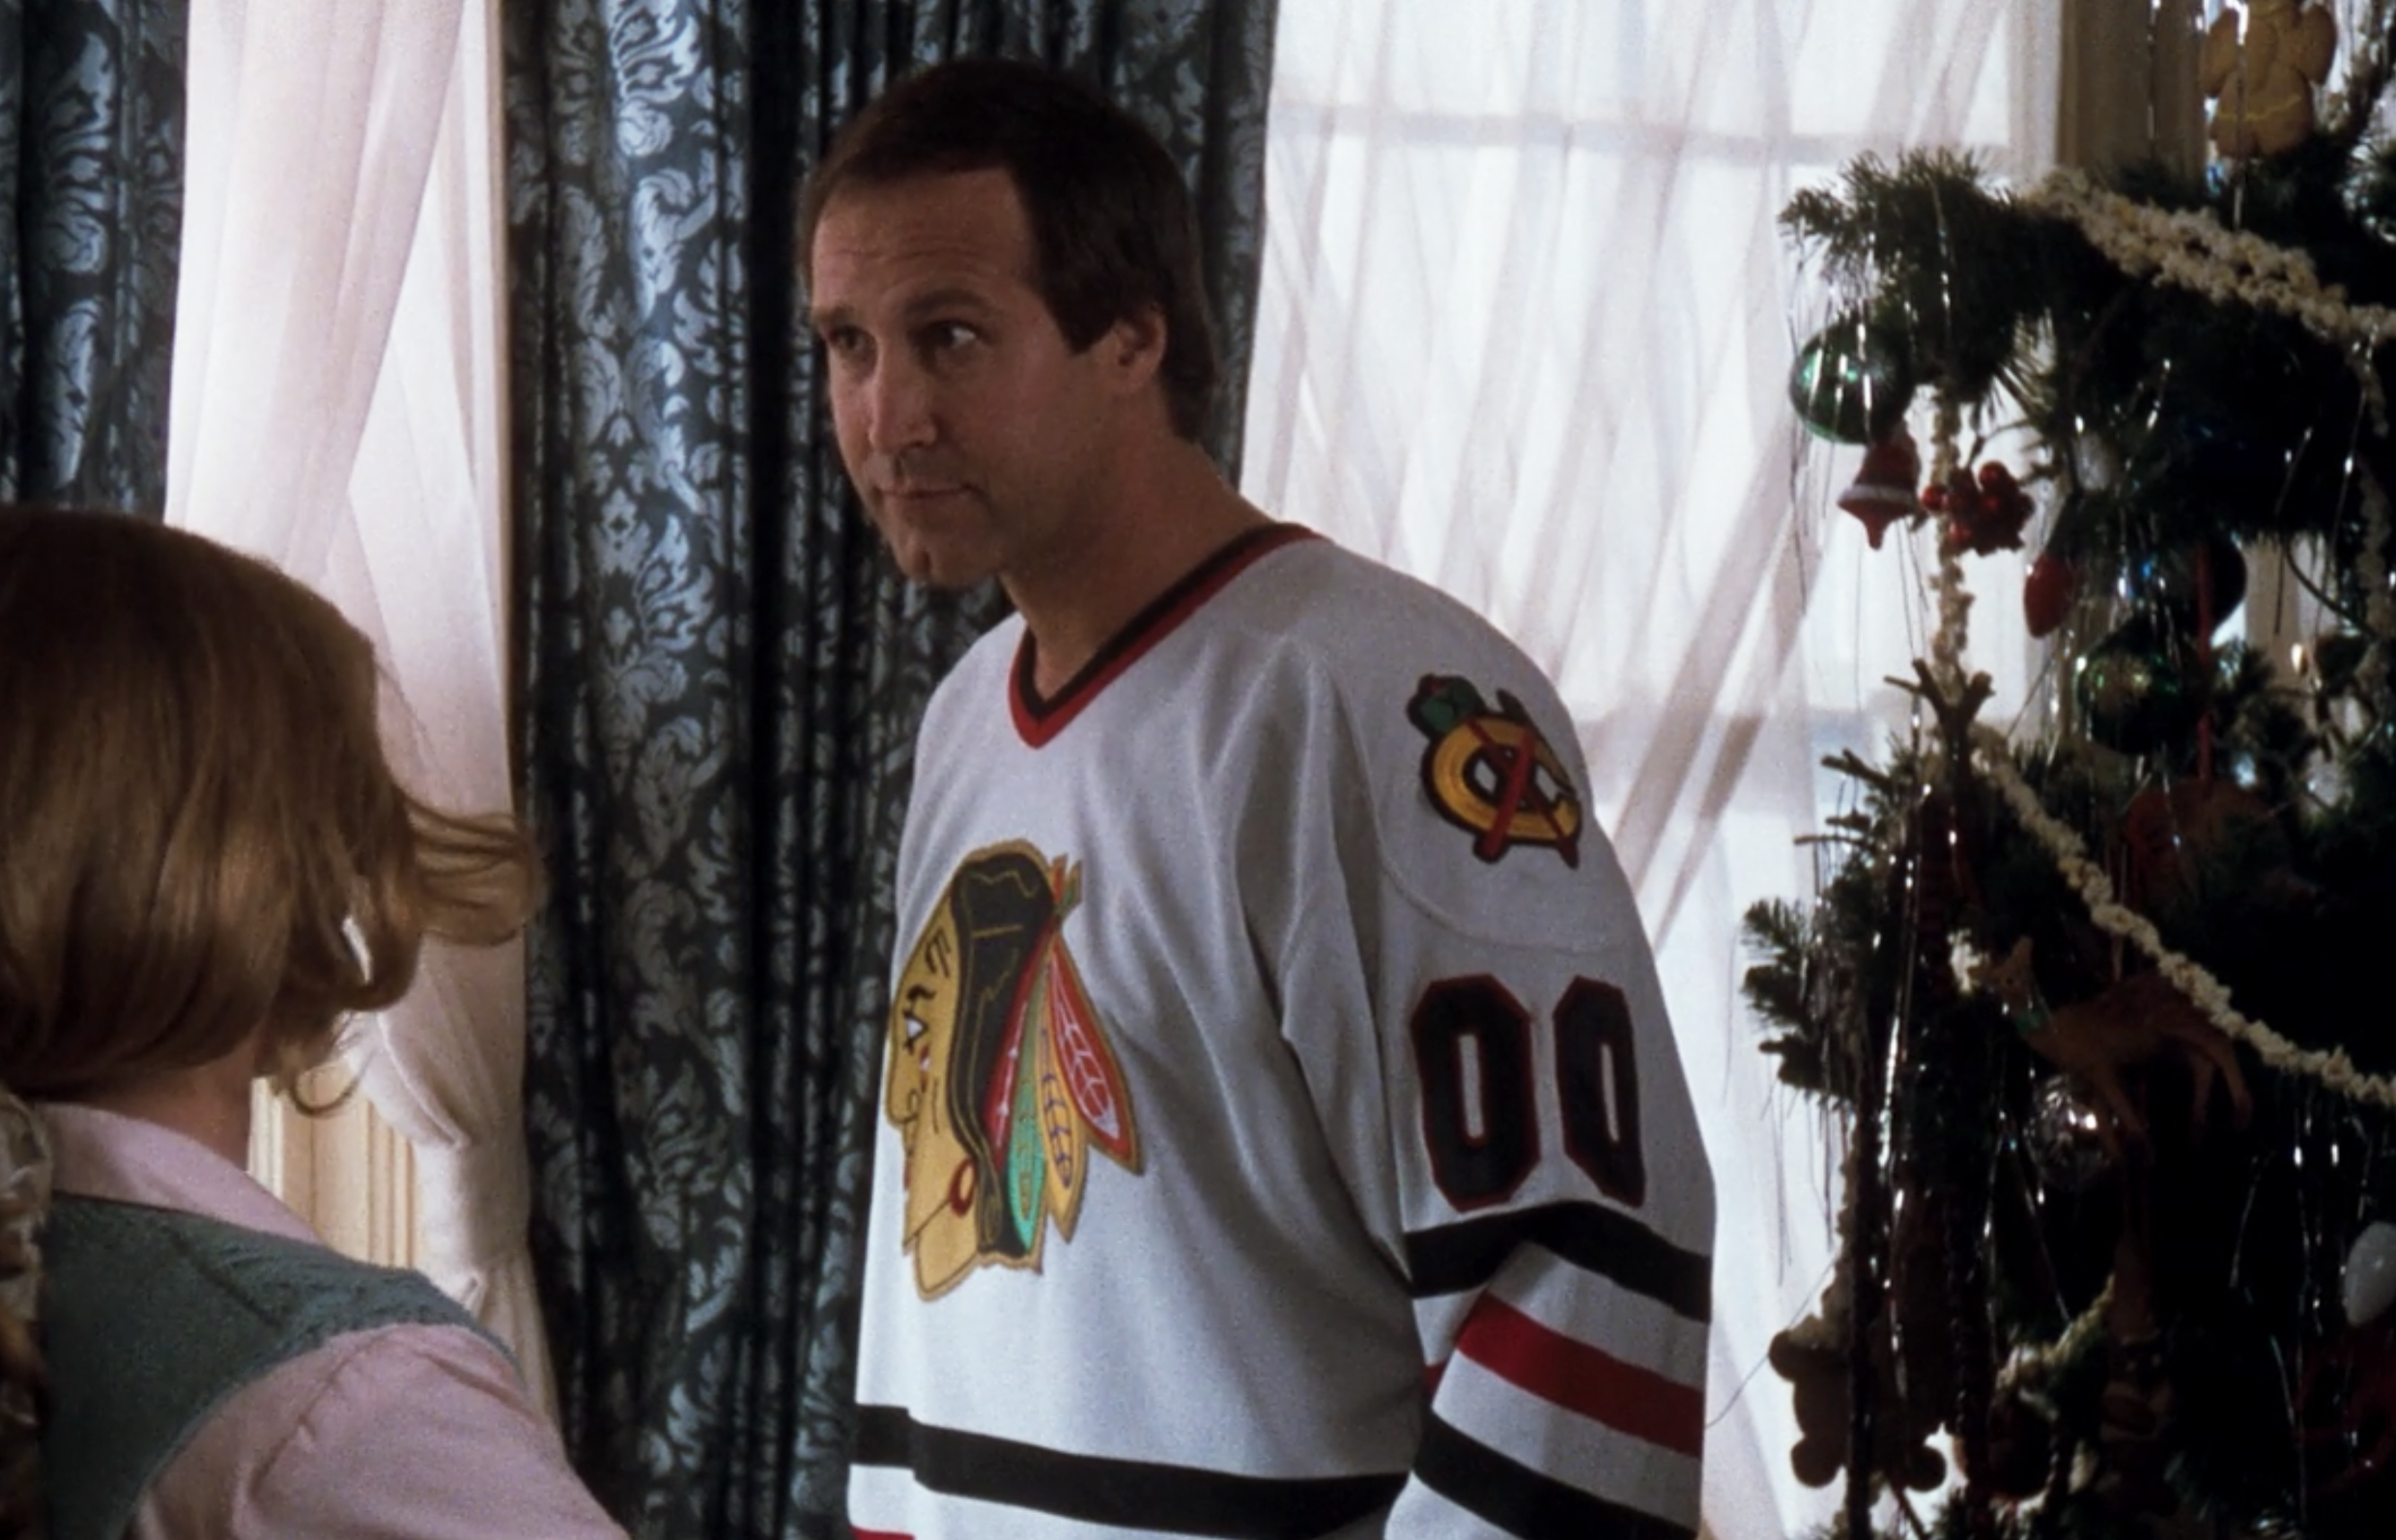 CHEVY CHASE SIGNED CLARK GRISWOLD BLACKHAWKS CHRISTMAS VACATION JERSEY PSA  MED